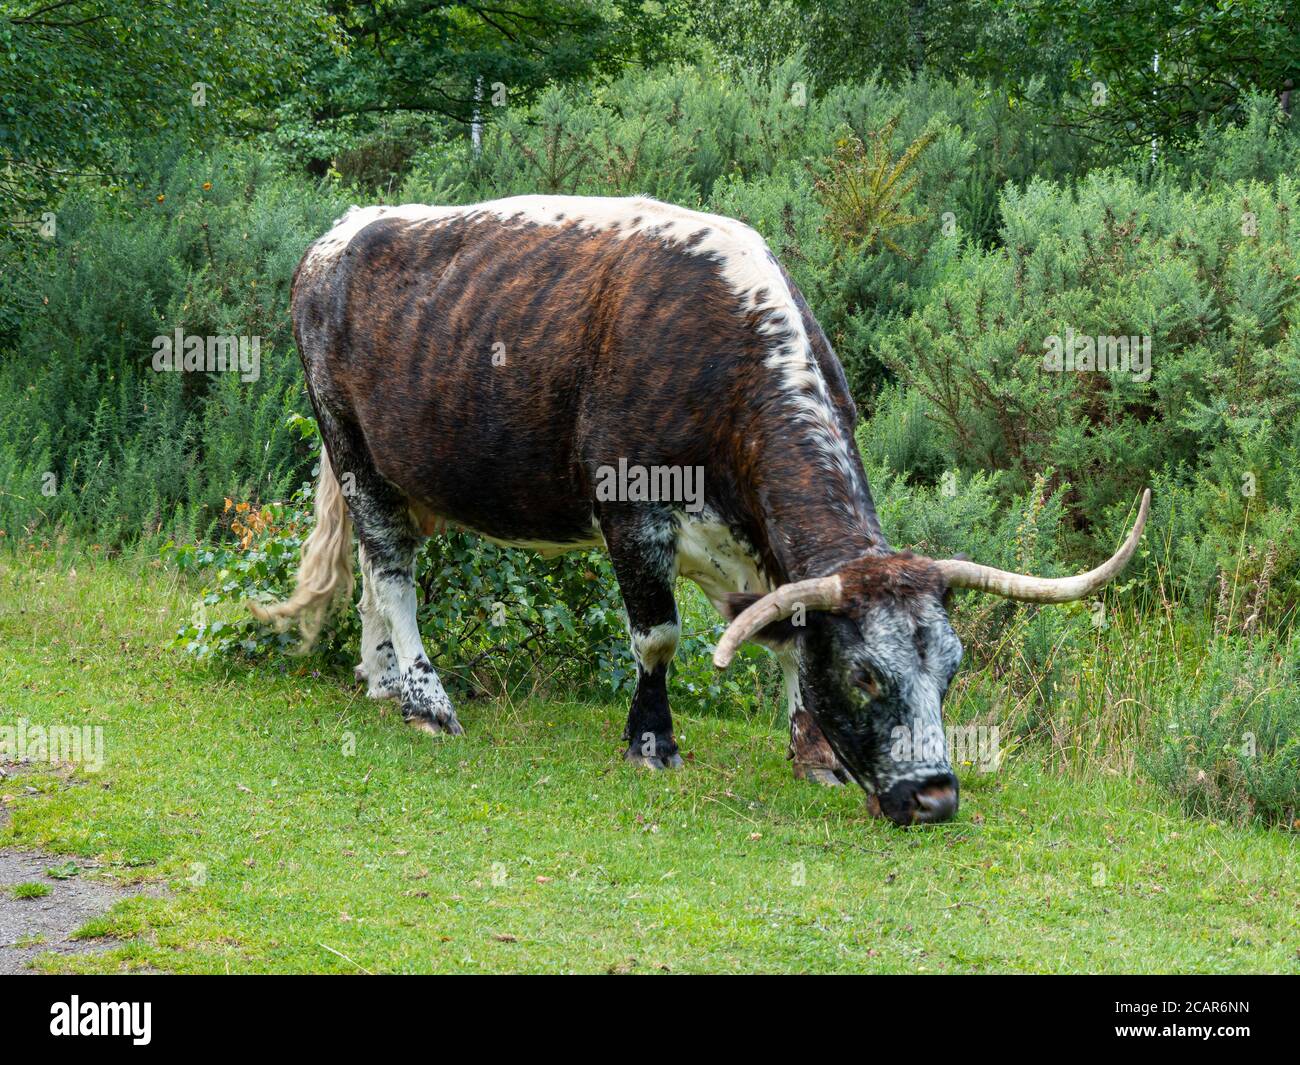 Magnificent English longhorn cow grazing on a grass verge Stock Photo